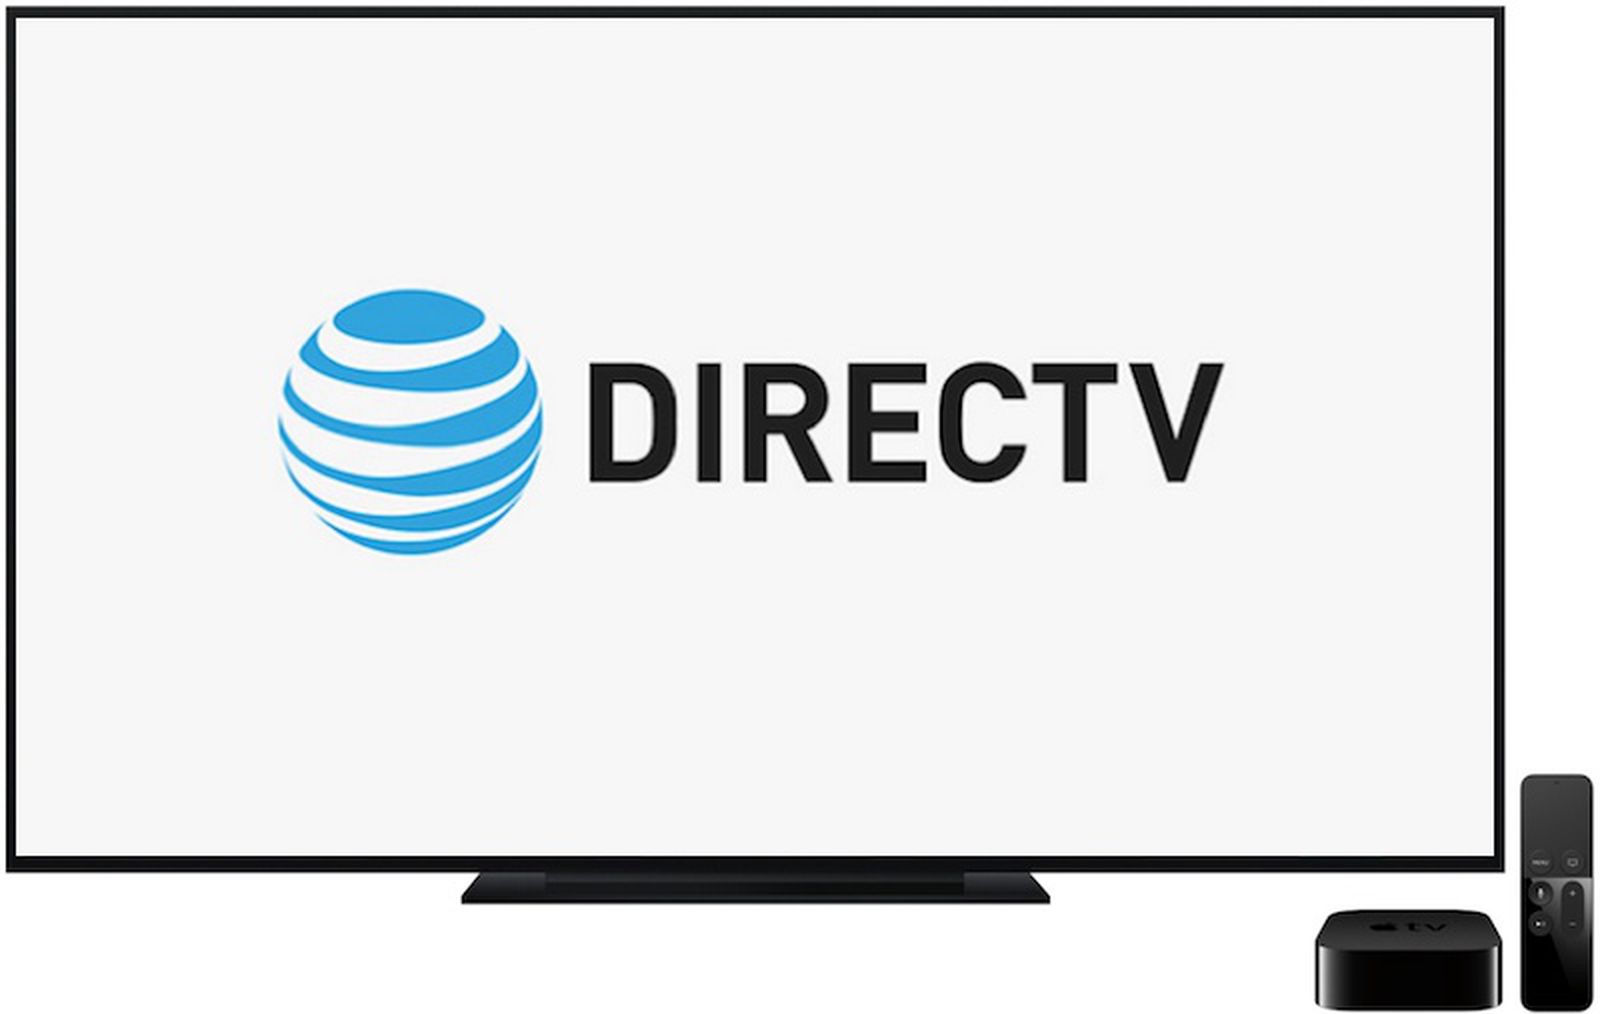 DIRECTTV. DIRECTV. At&t. One like tv